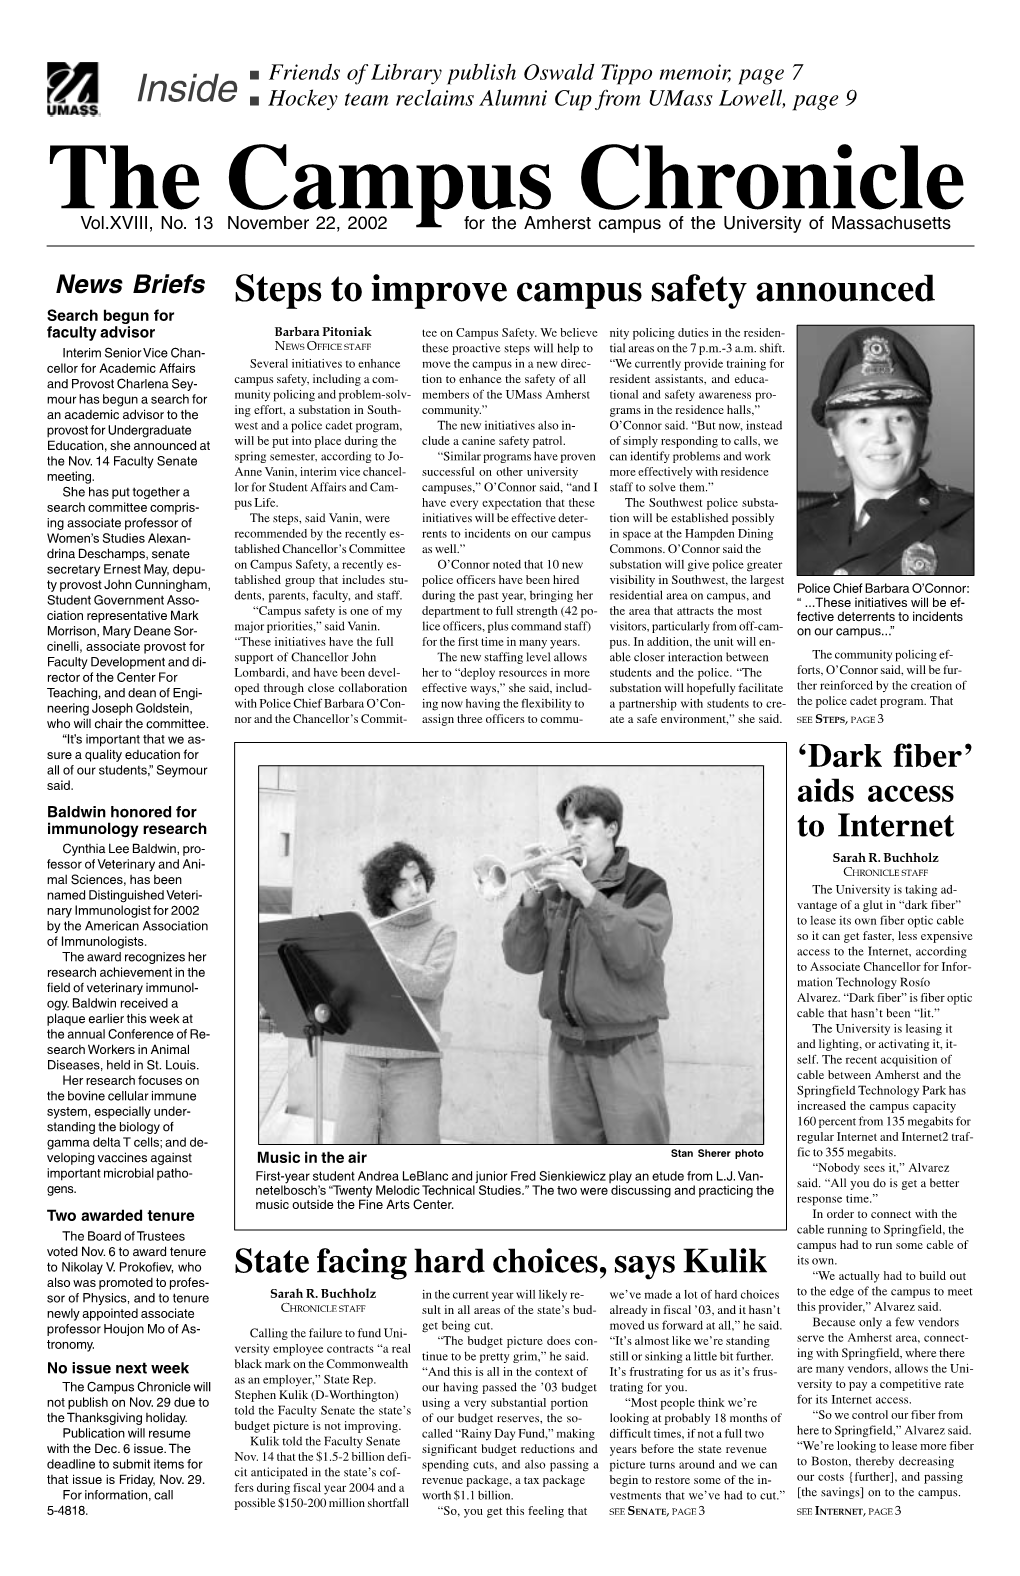 The Campus Chronicle Nov. 22, 2002